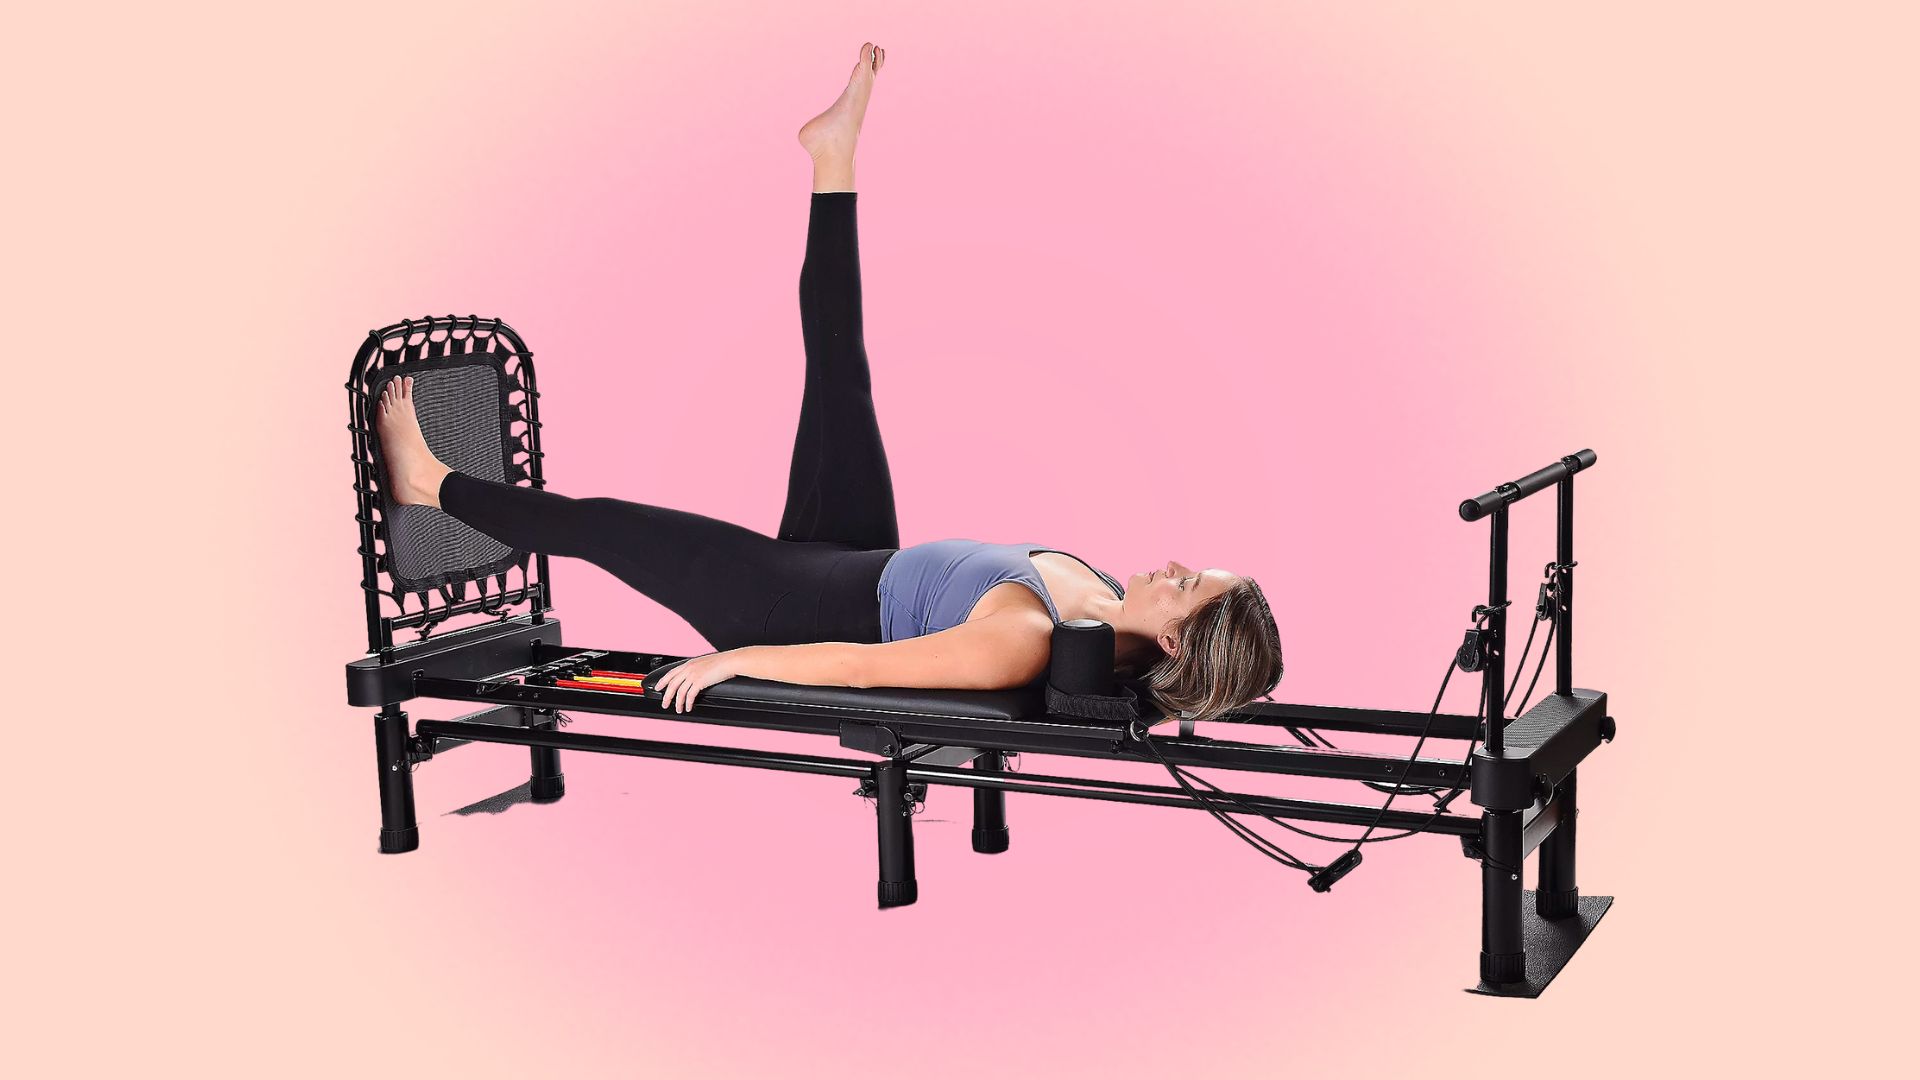 Sculpt Lean Muscle With This Pilates At-Home Machine